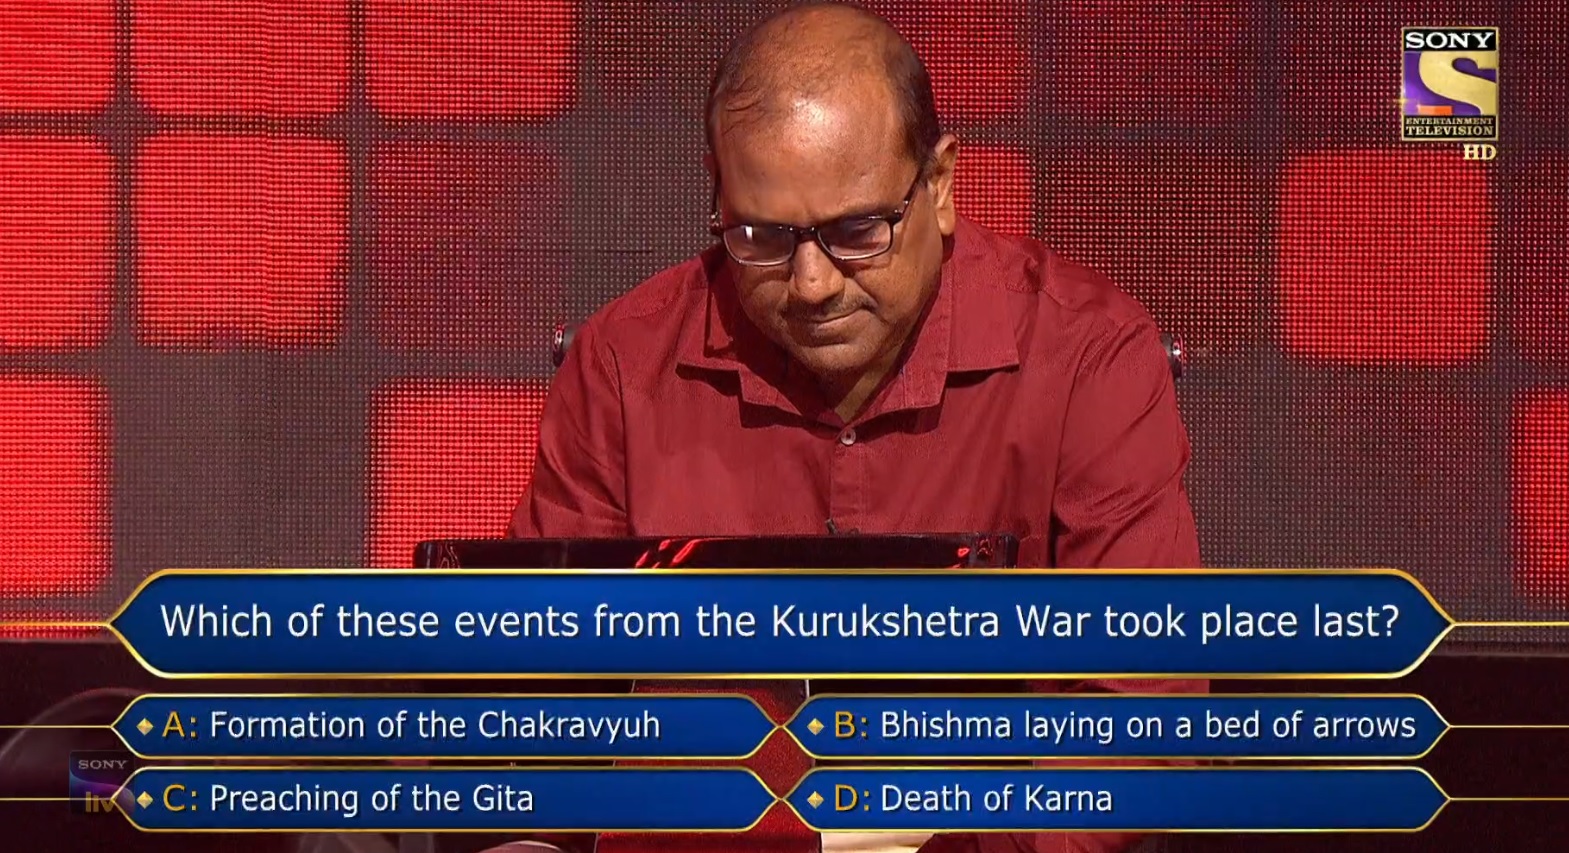 Ques : Which of these events from the Kurukshetra War took place last?